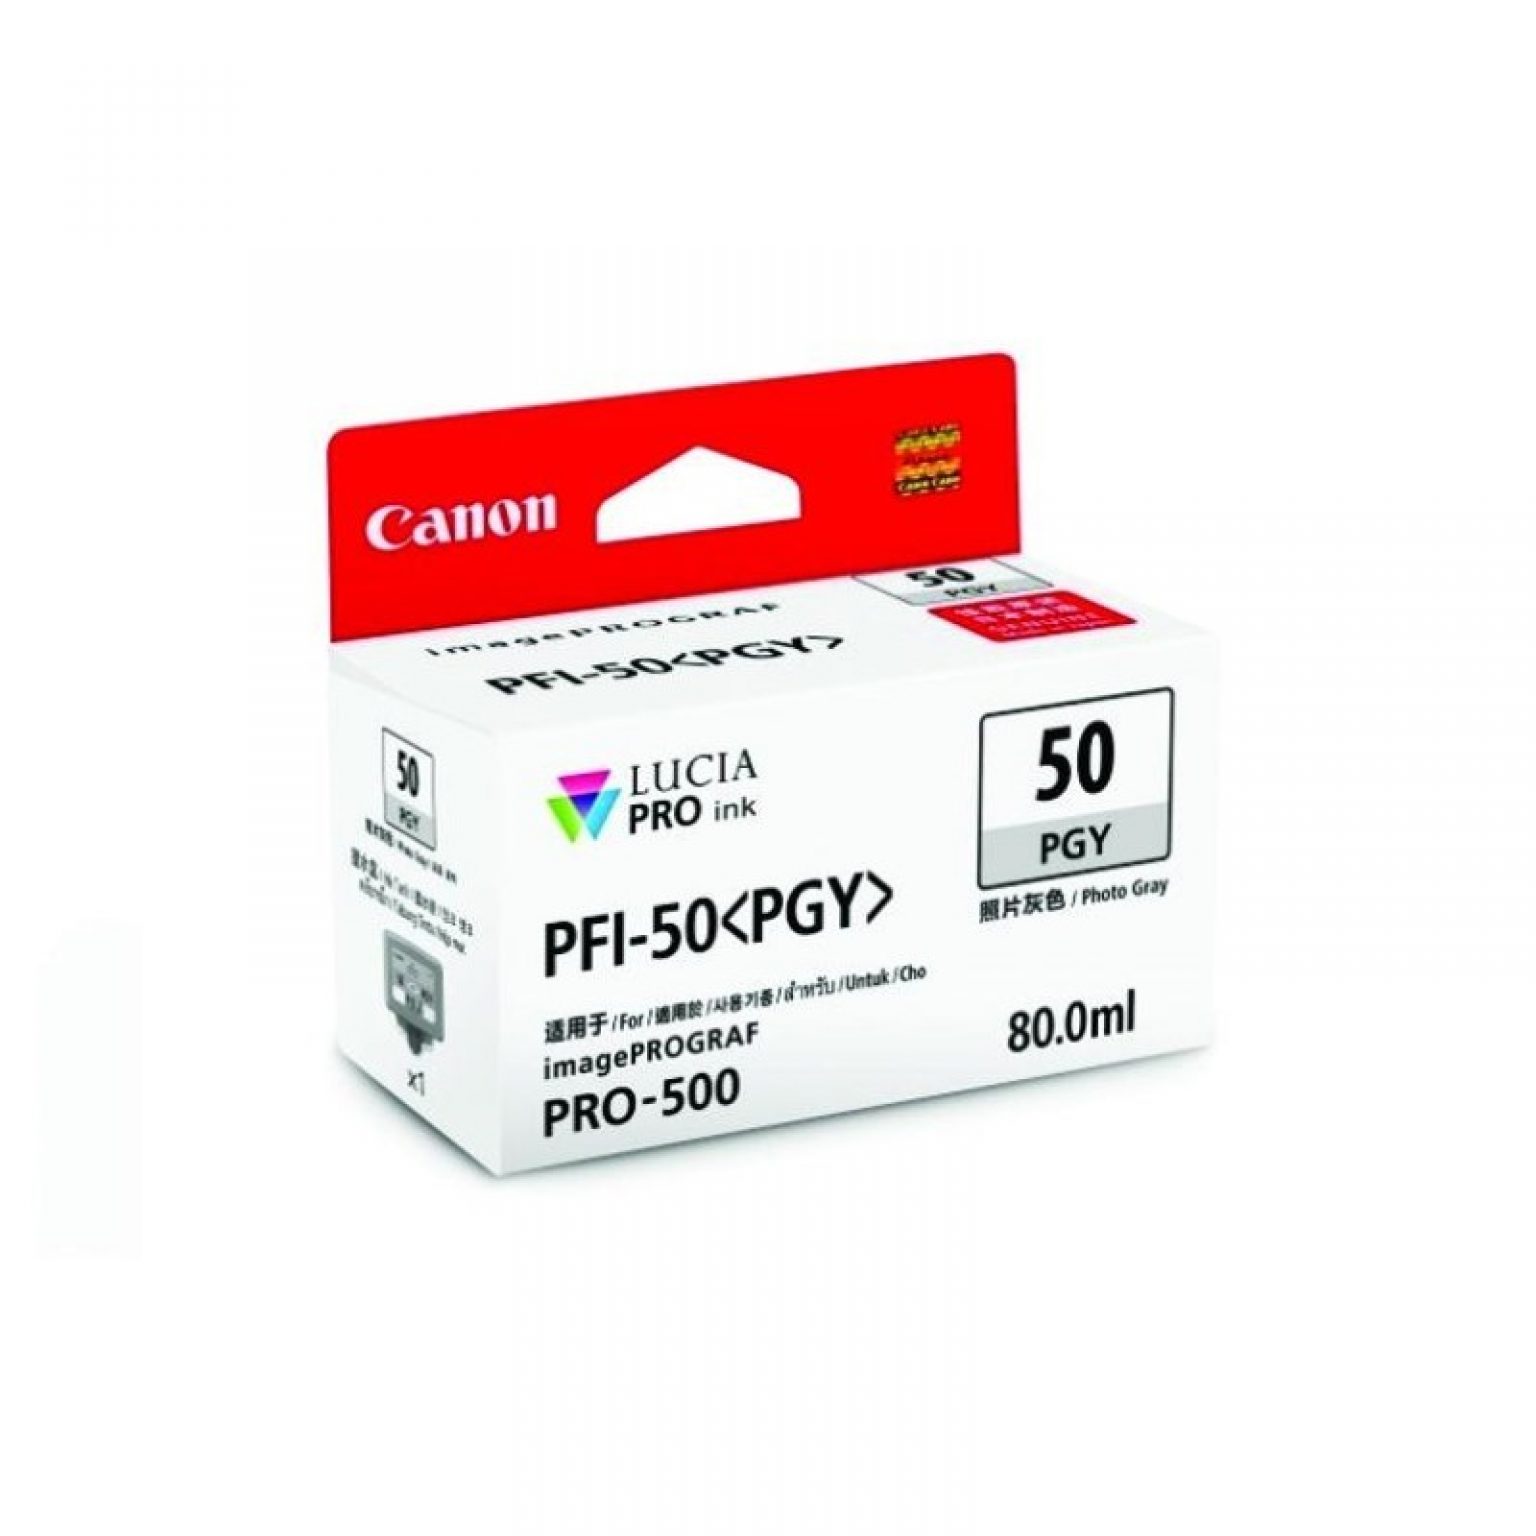 CANON - Ink PFI-50 Photo Grey for Pro500 [PFI-50PGY]